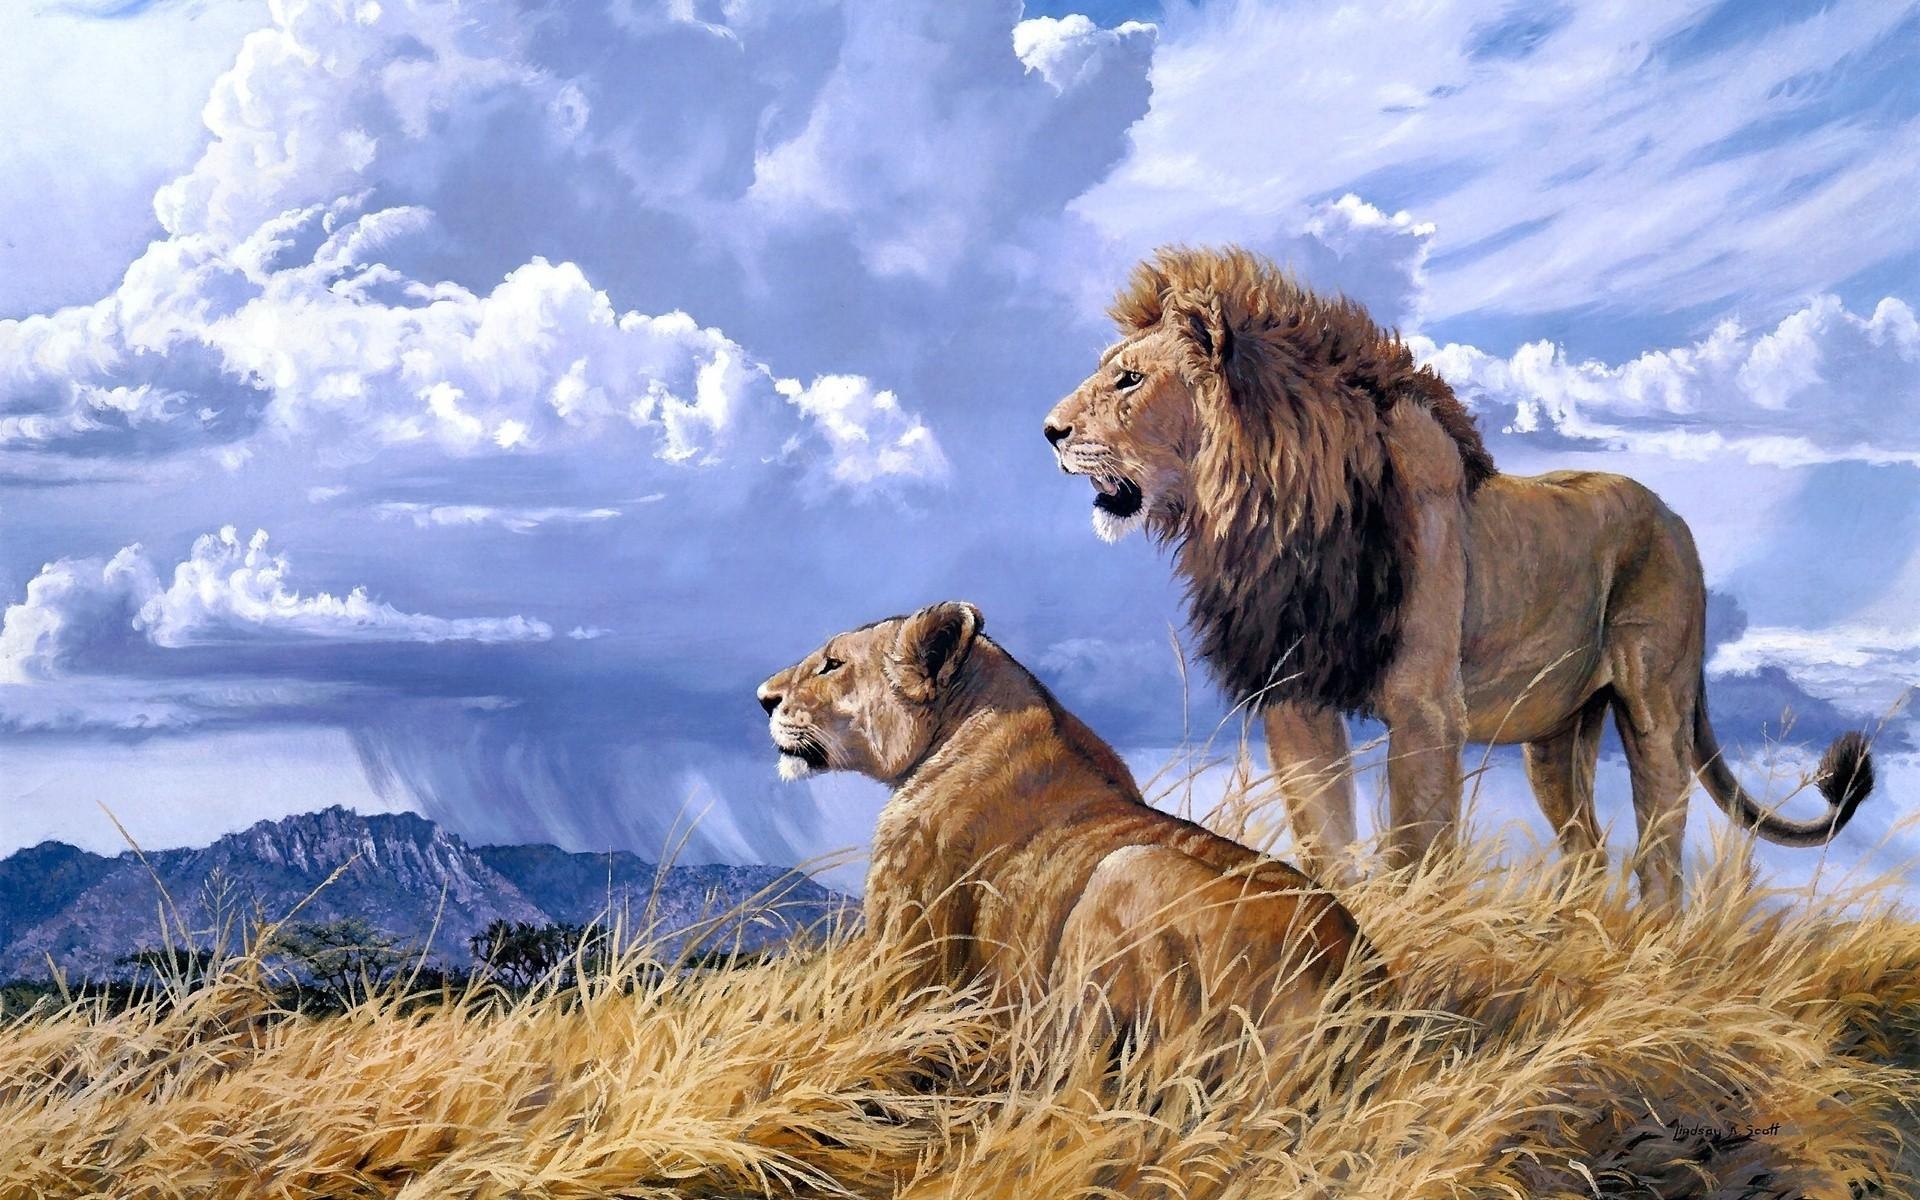 Lion and lioness couple in forest animal images | HD Wallpapers Rocks